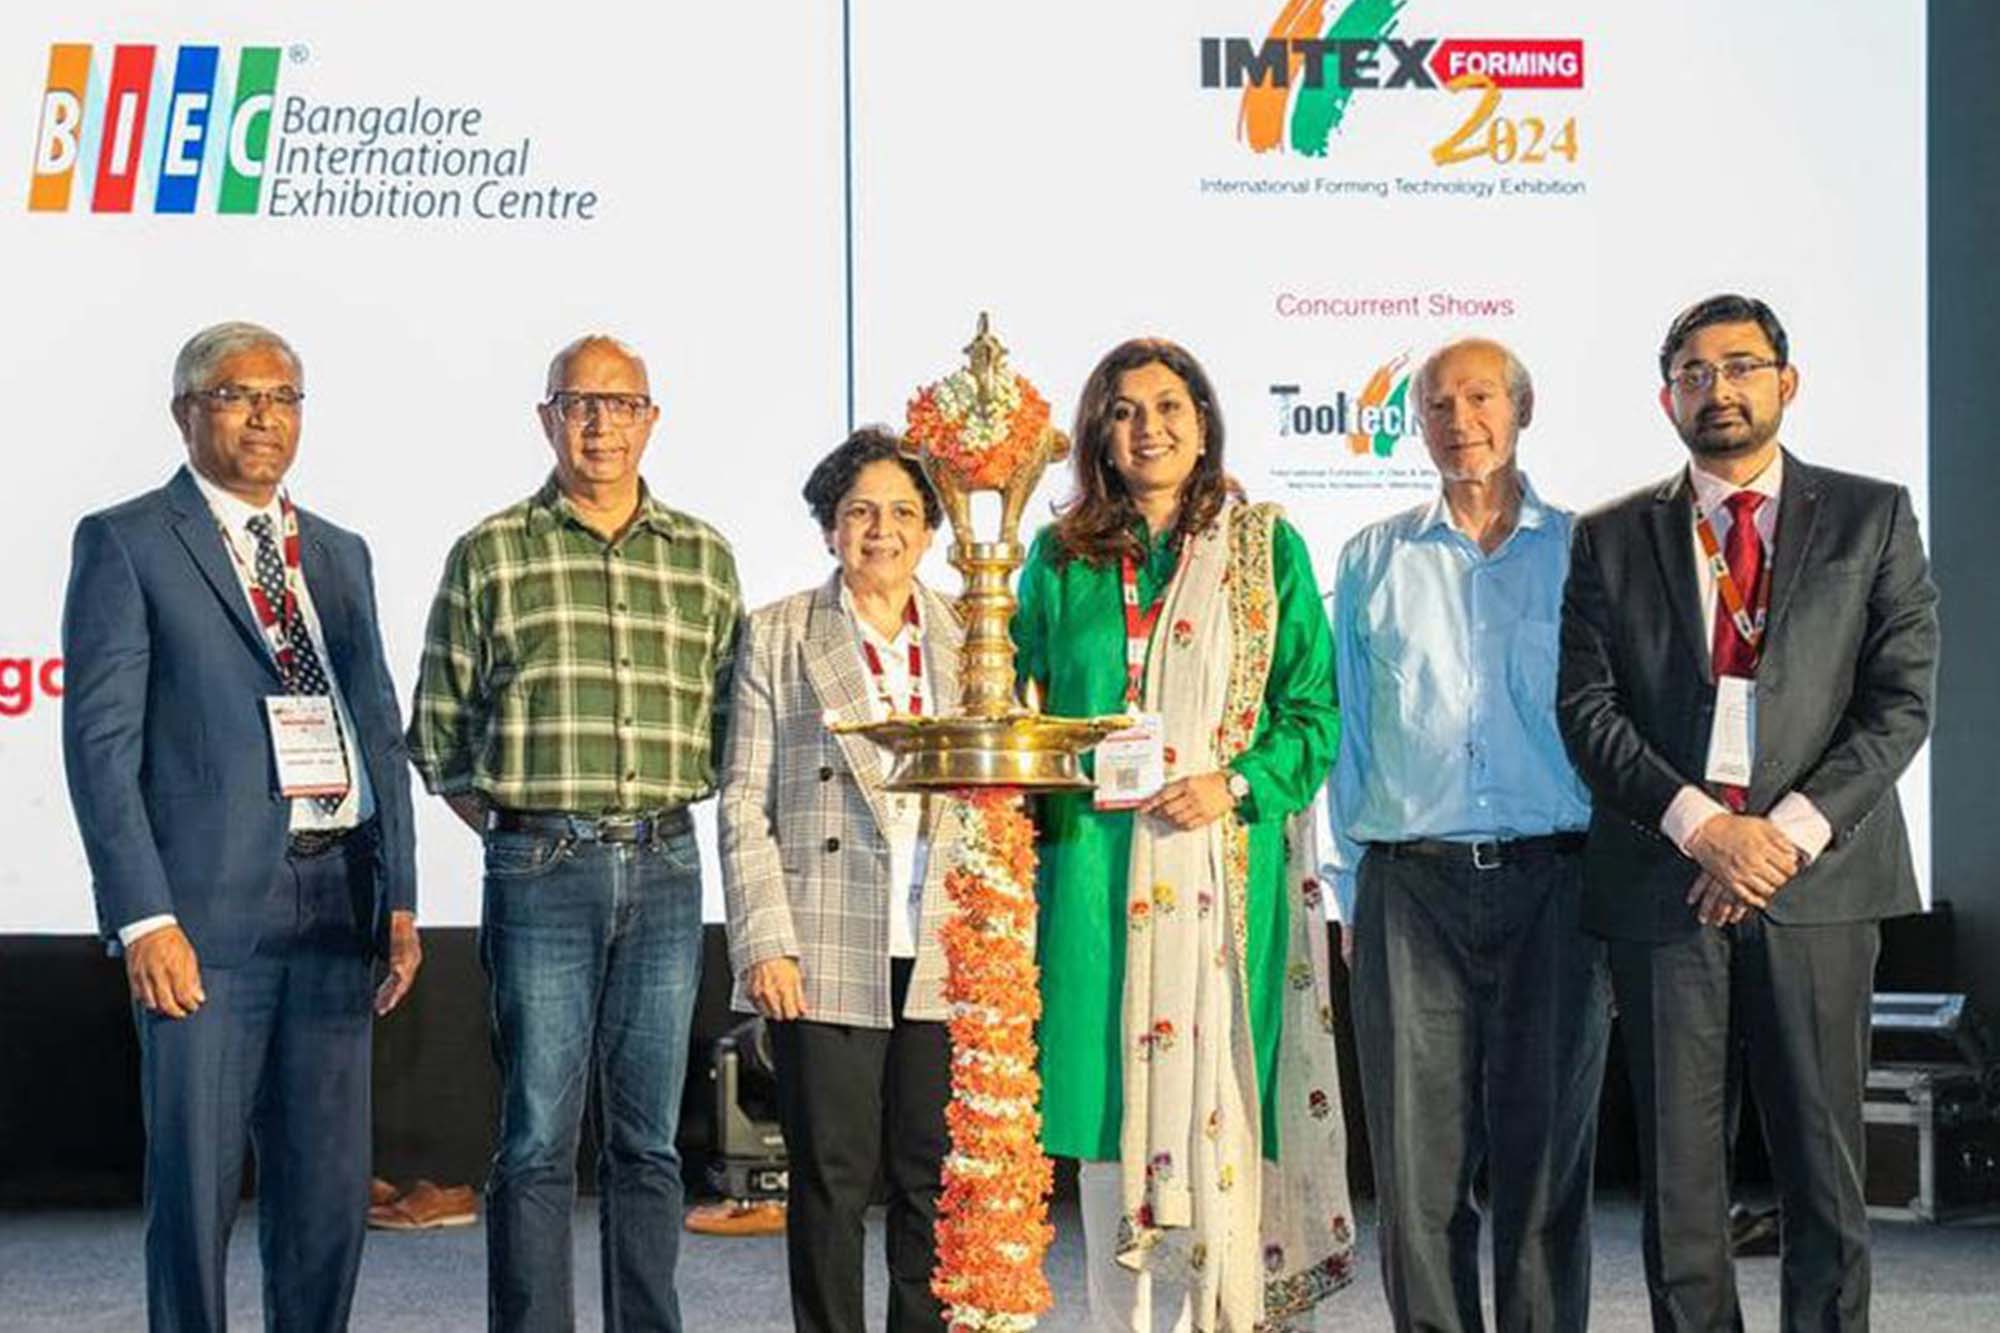 IMTEX Forming 2024 ignited enthusiasm for metal-forming technologies